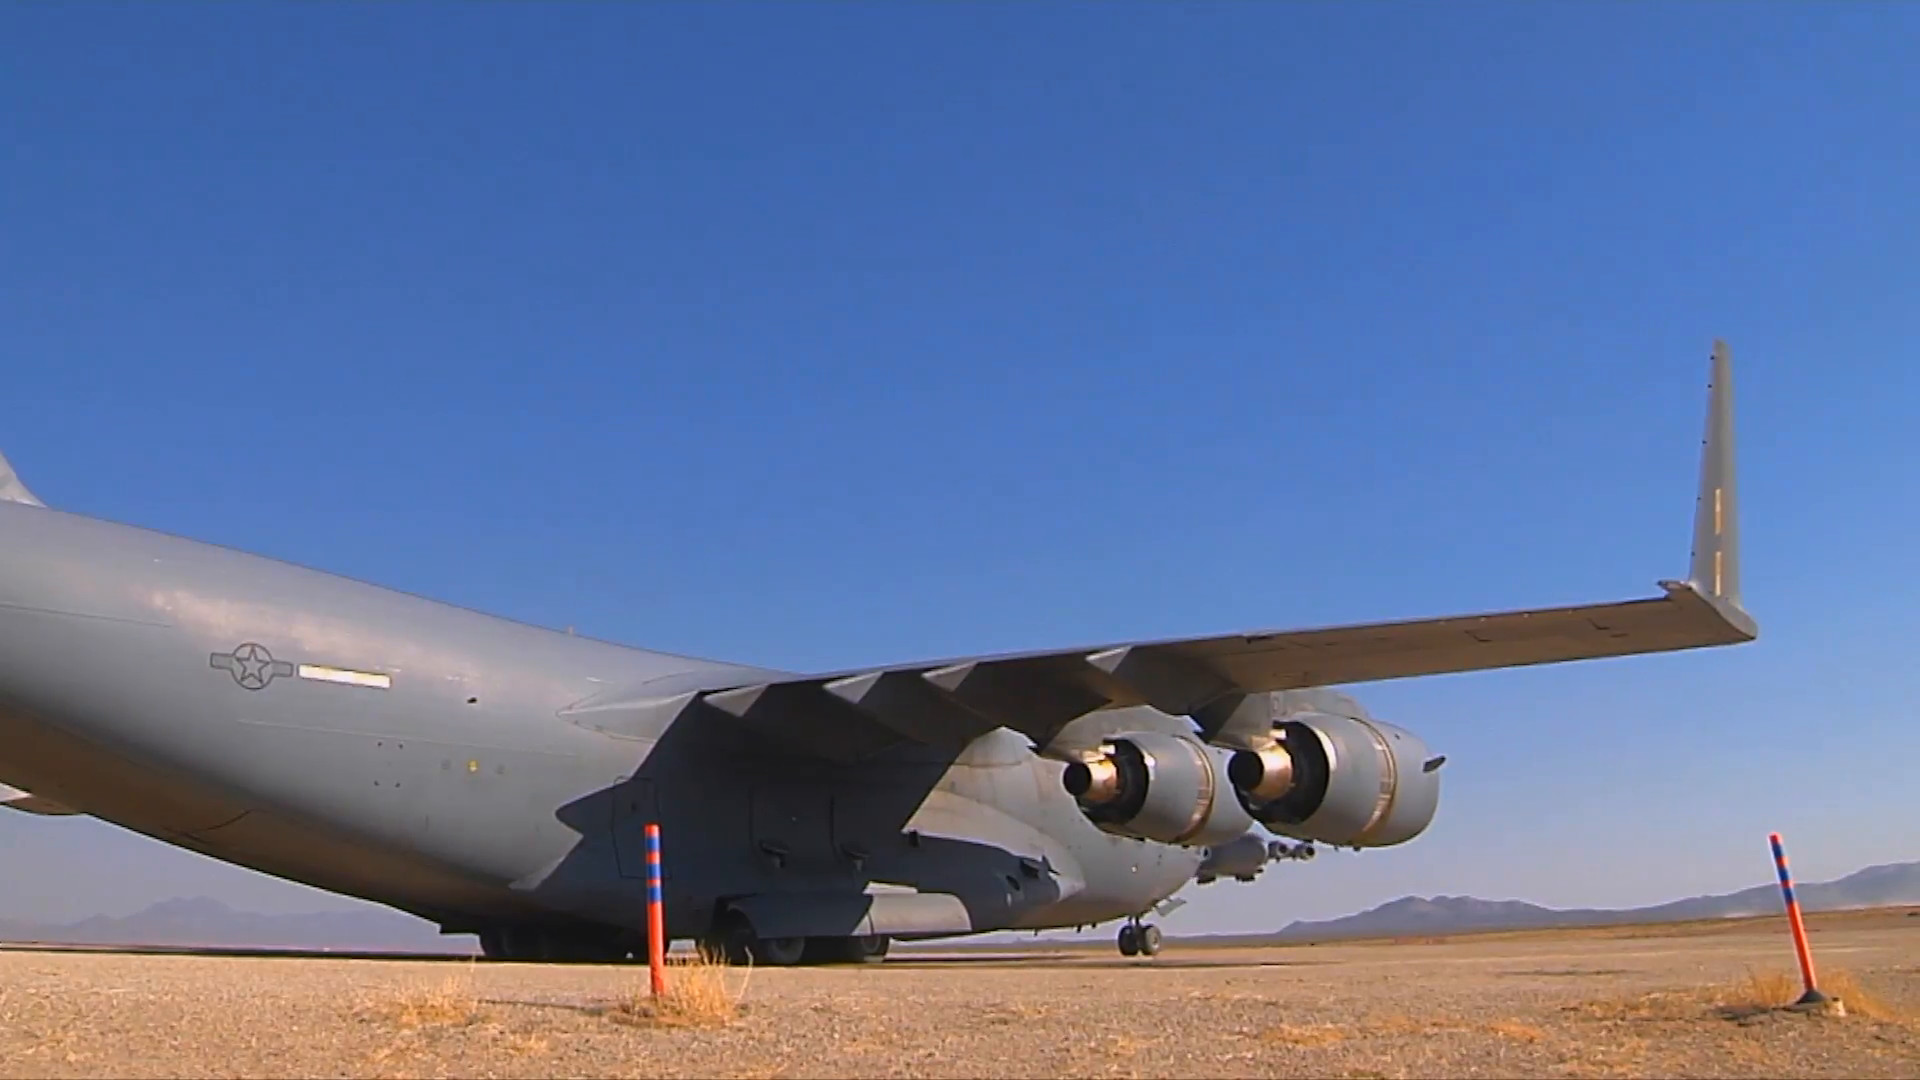 1920x1080 A C-130 cargo plane lands on a dirt runway in the desert. Stock Video  Footage - Storyblocks Video